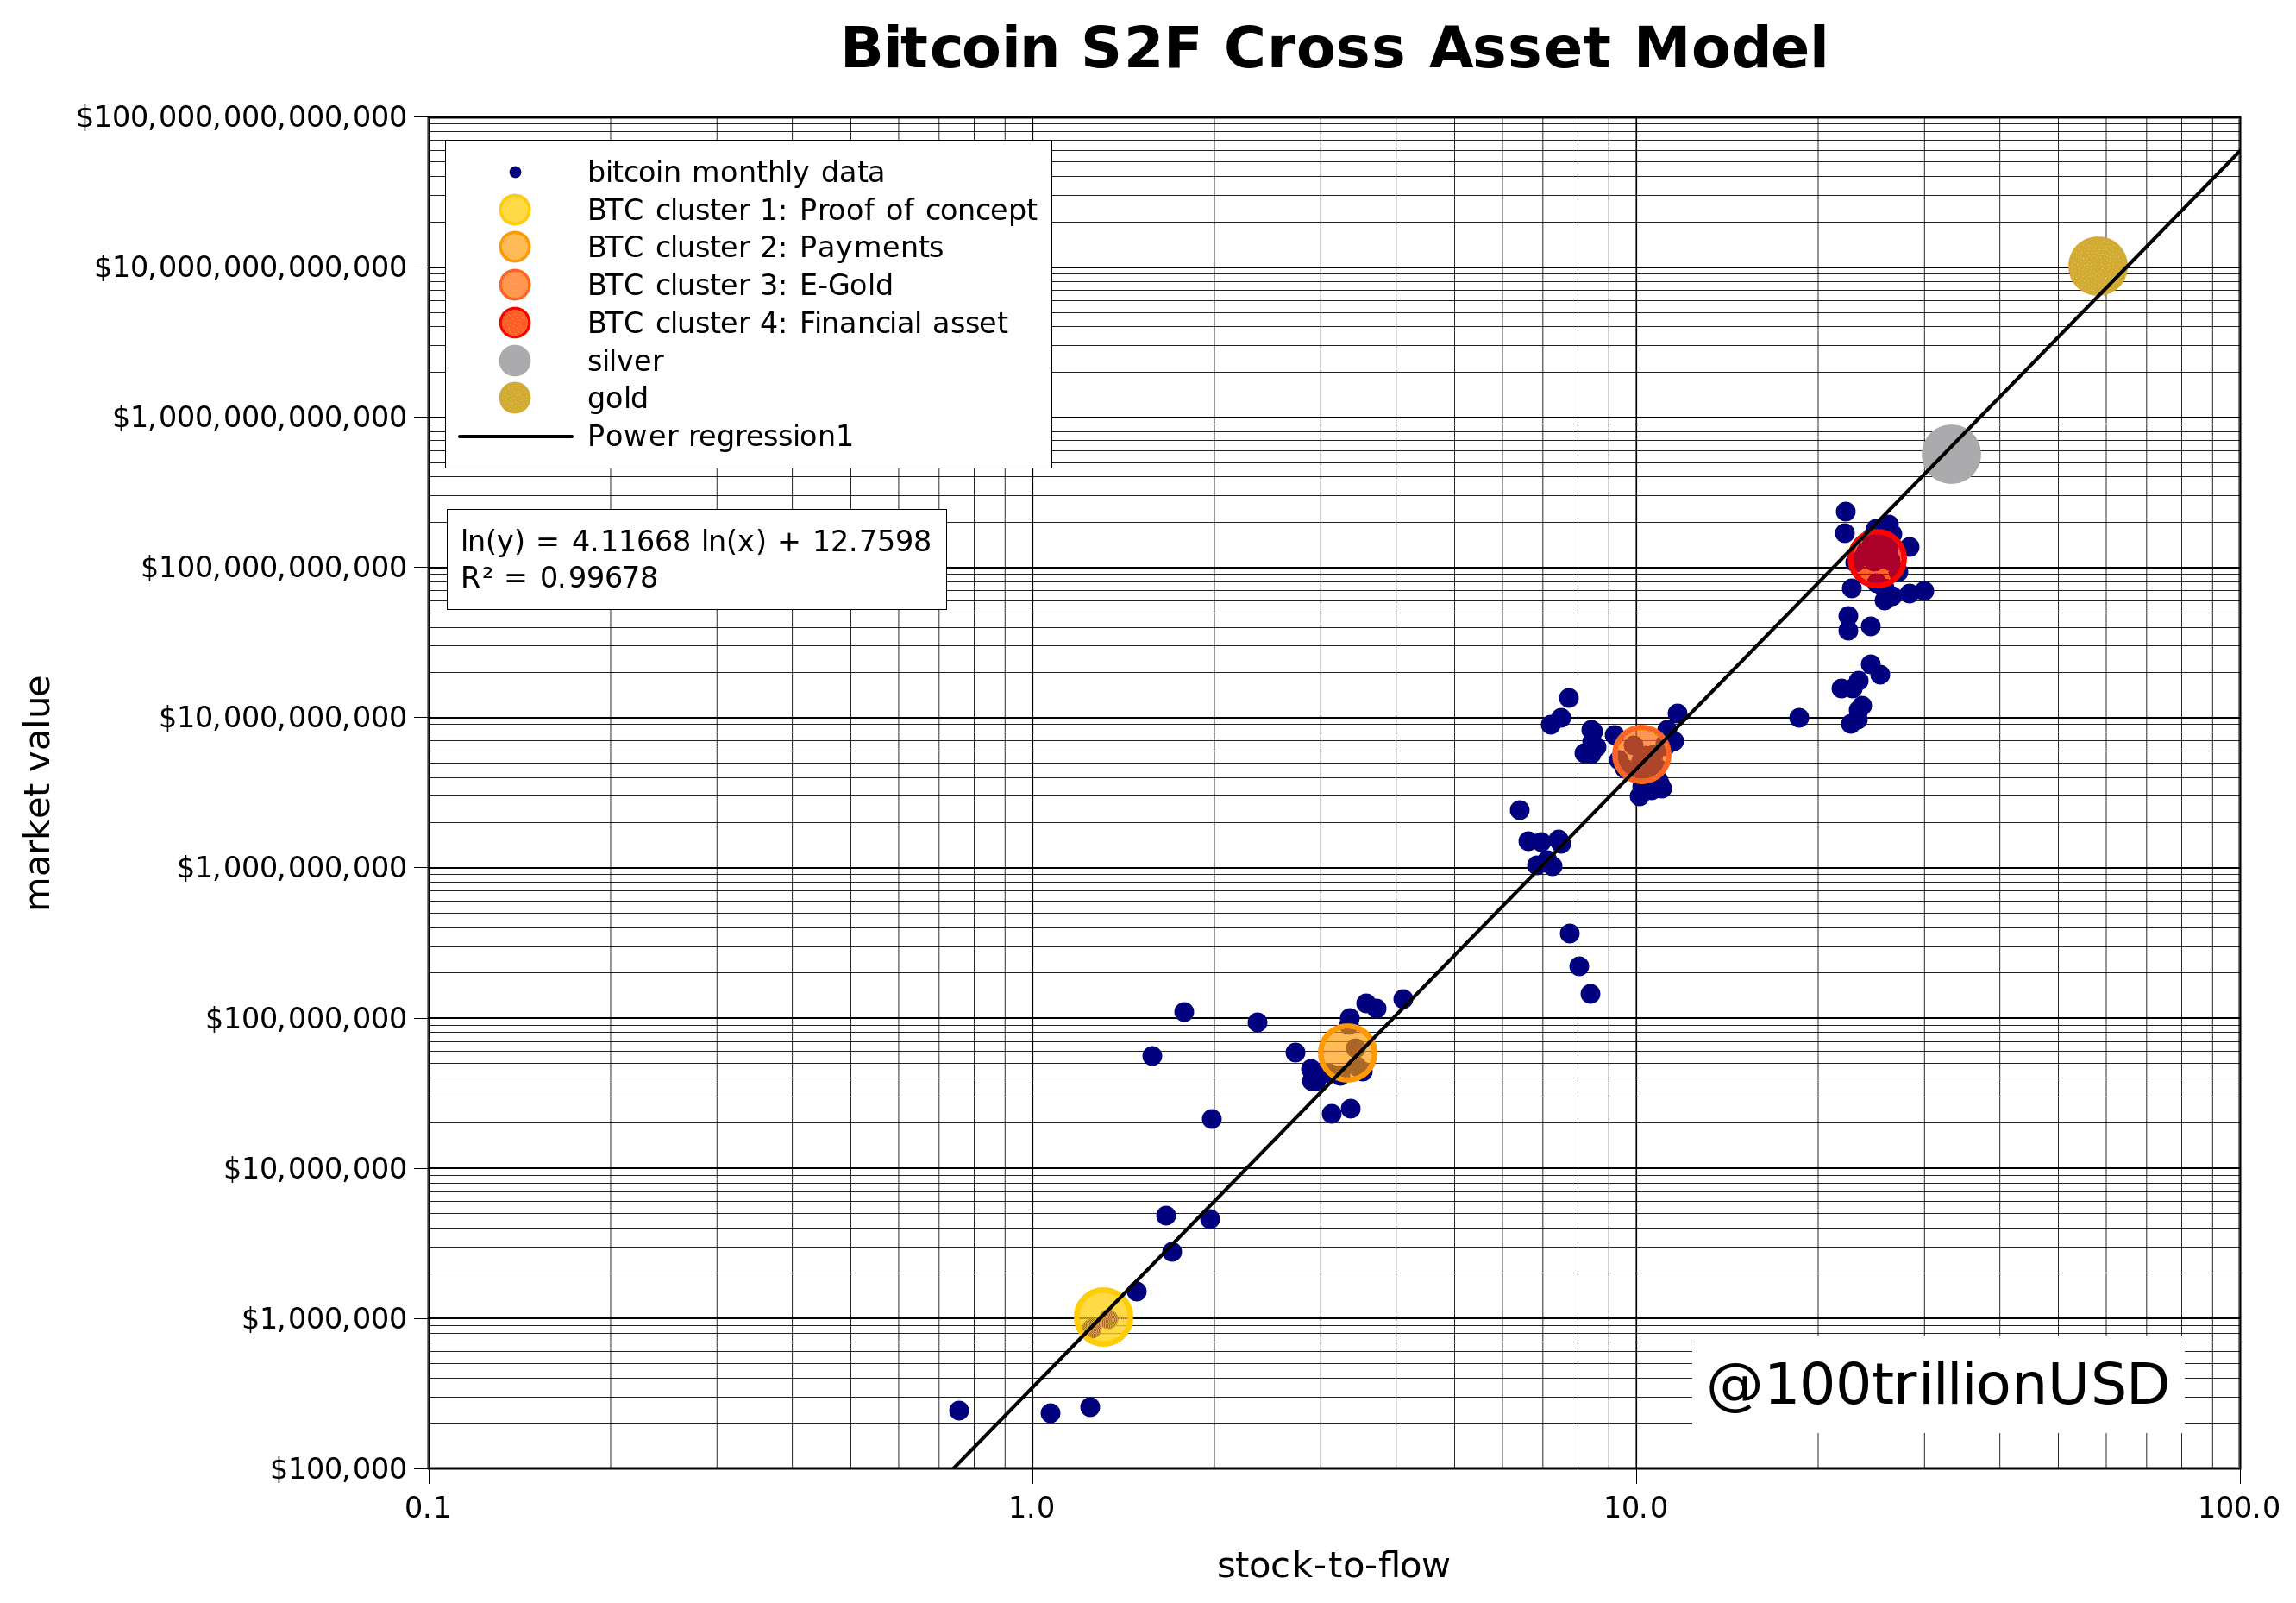 Image of a new iteration of the Stock to Flow Model from analyst PlanB. It predicts Bitcoin will reach $288,000 or so in the next era. 